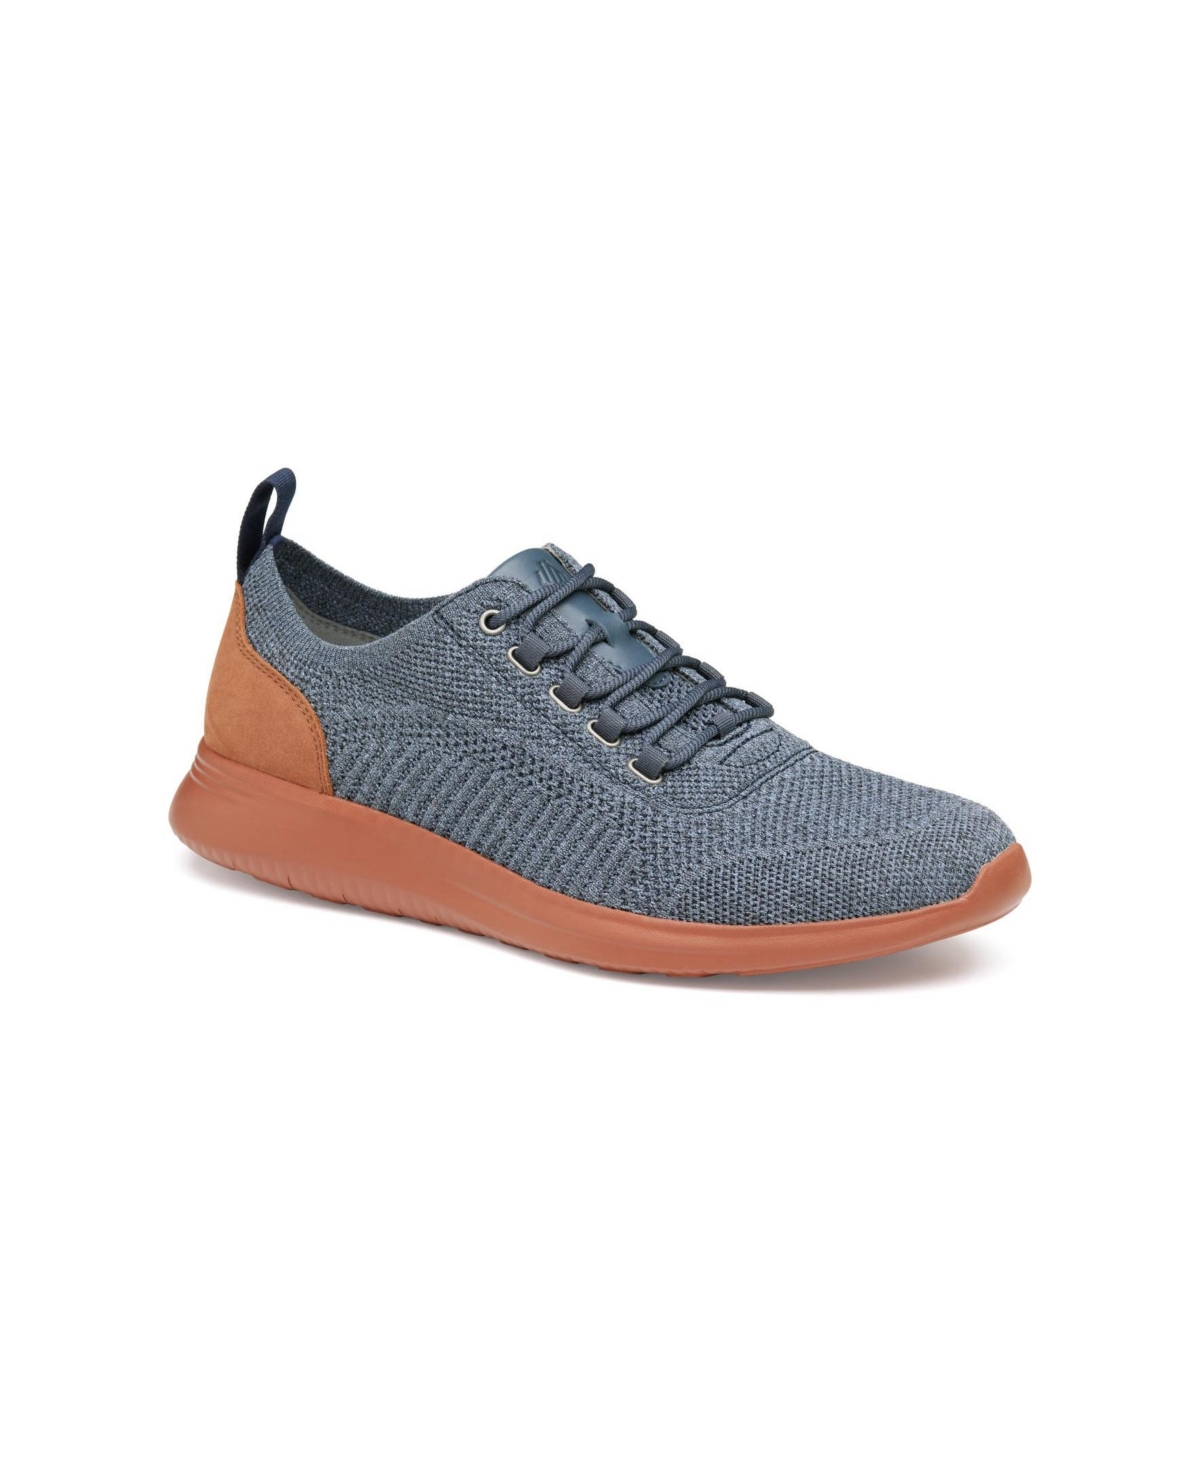 Johnston & Murphy Men's Amherst Knit U-throat Lace-up Shoes In Navy Knit